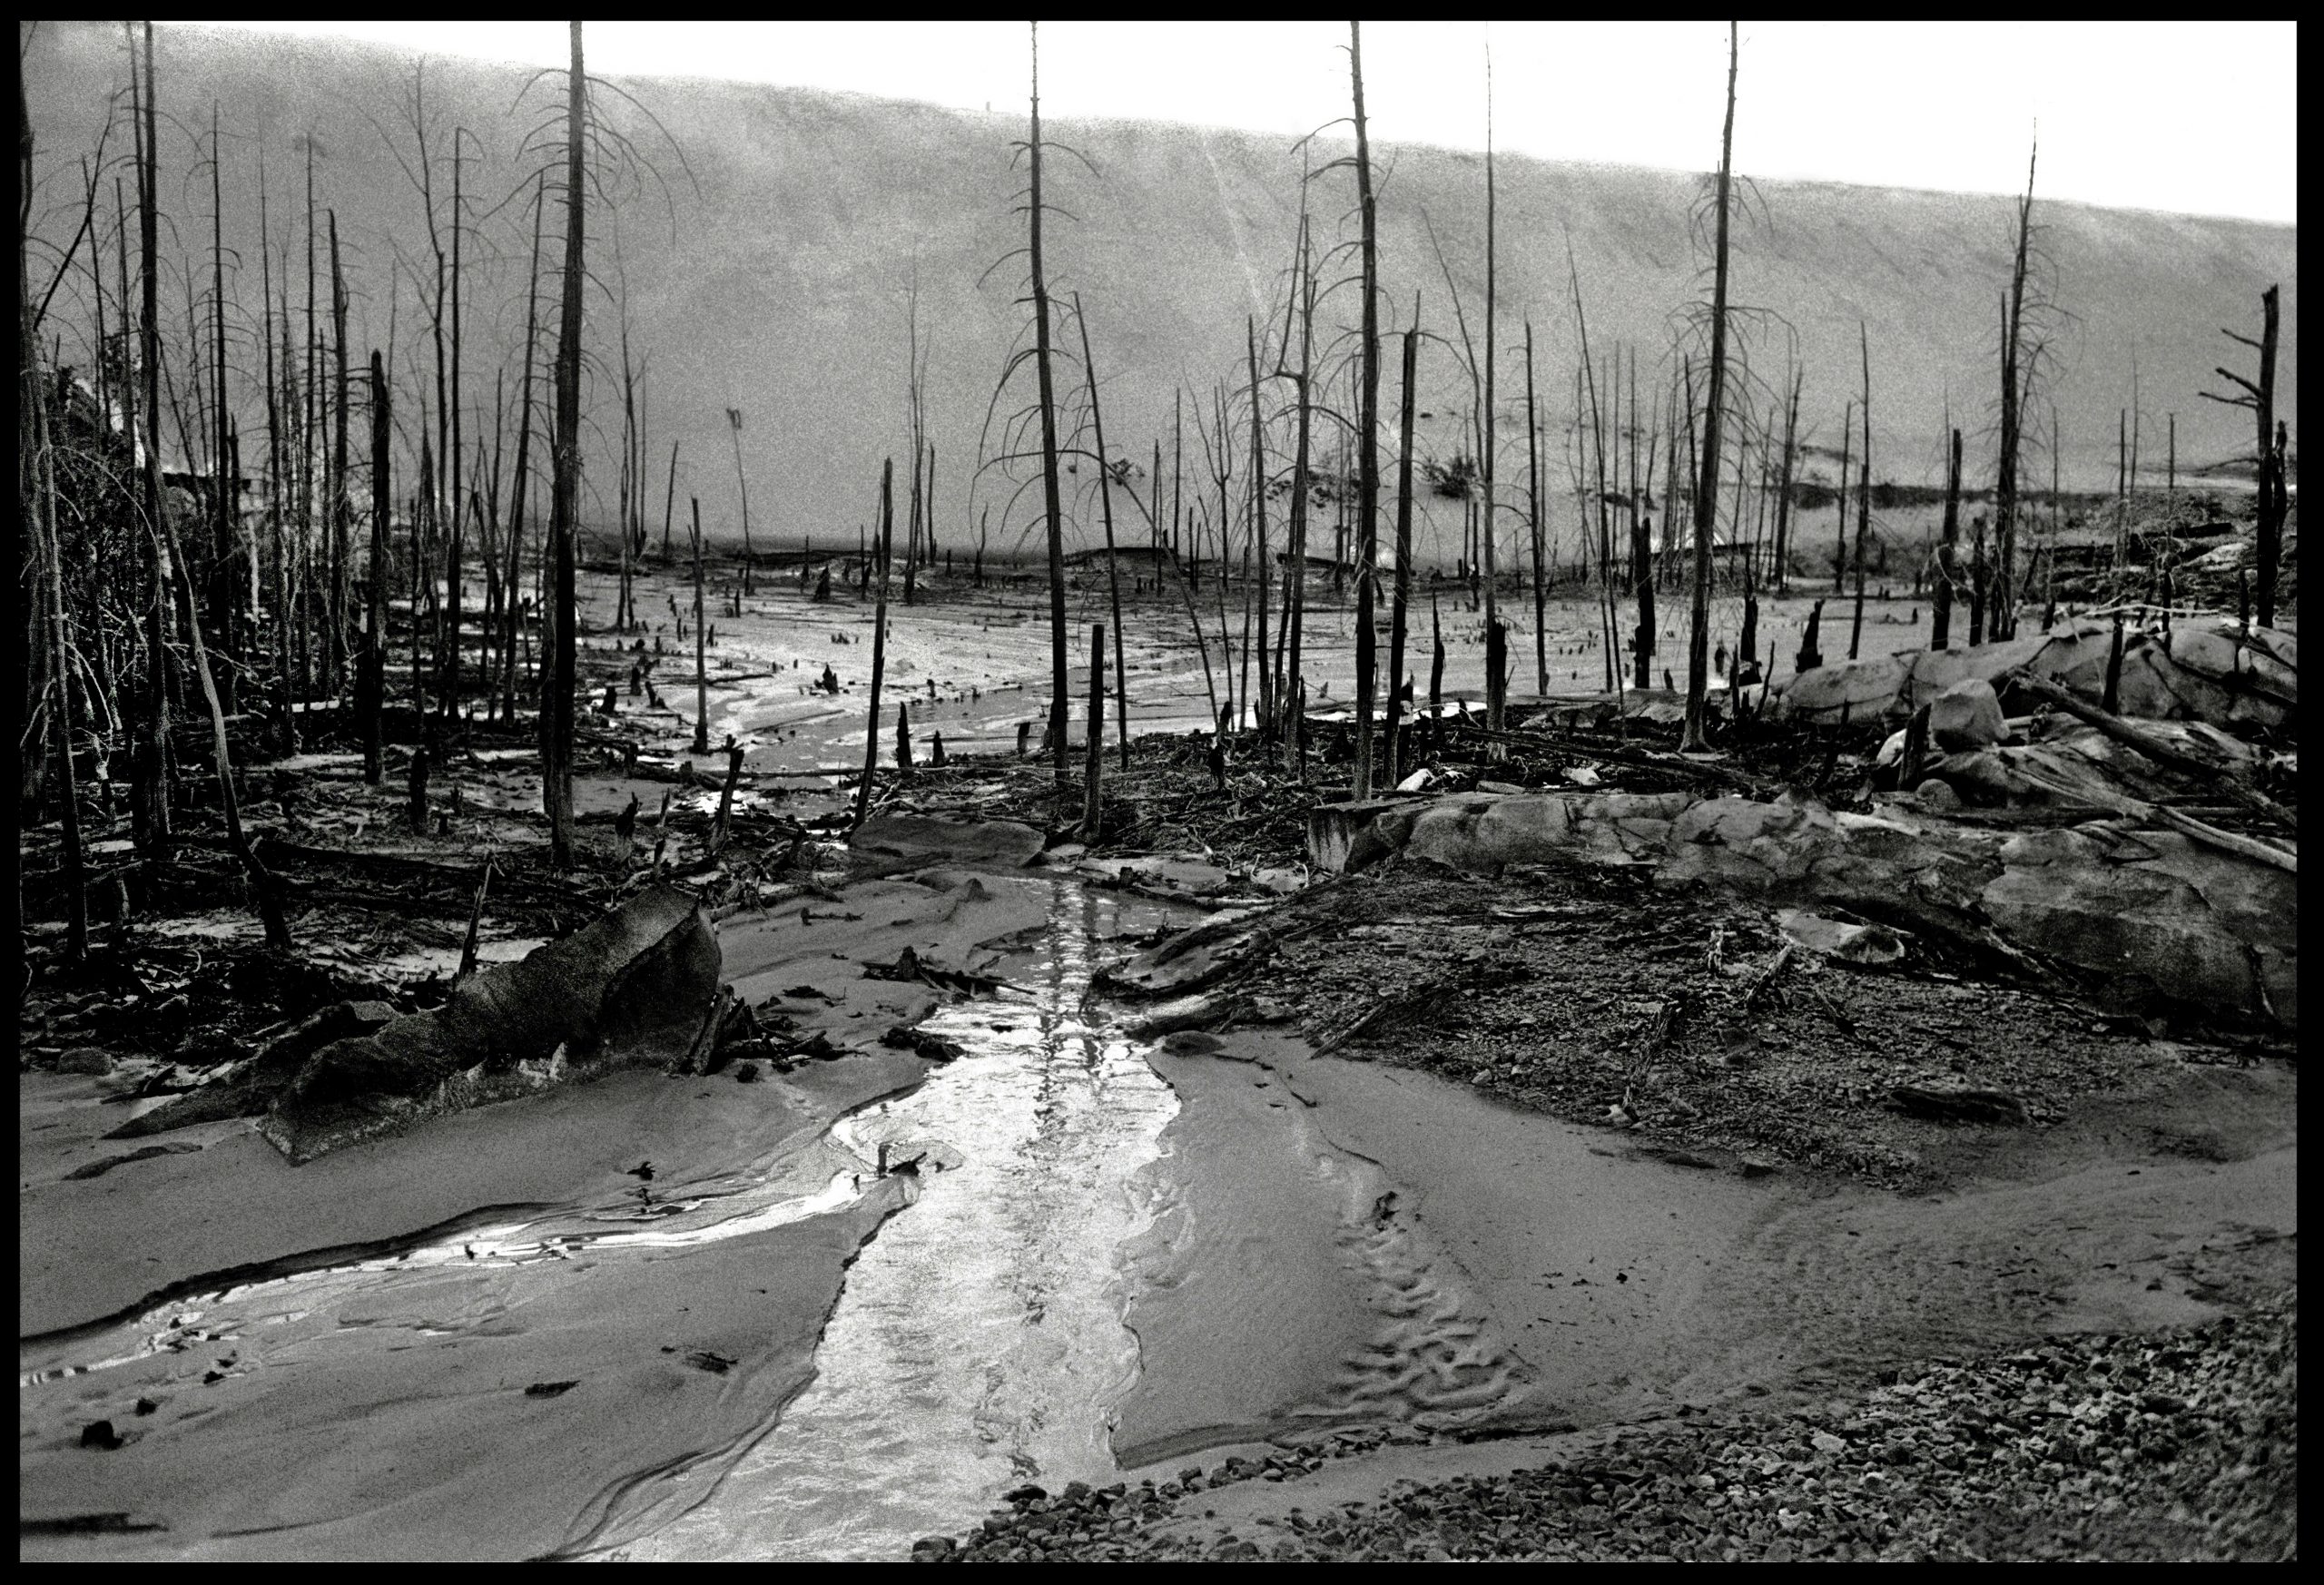 Black and white photograph of lifeless trees surrounded by radioactive sludge, with a 10 metre wall of sandy radioactive waste in the background.